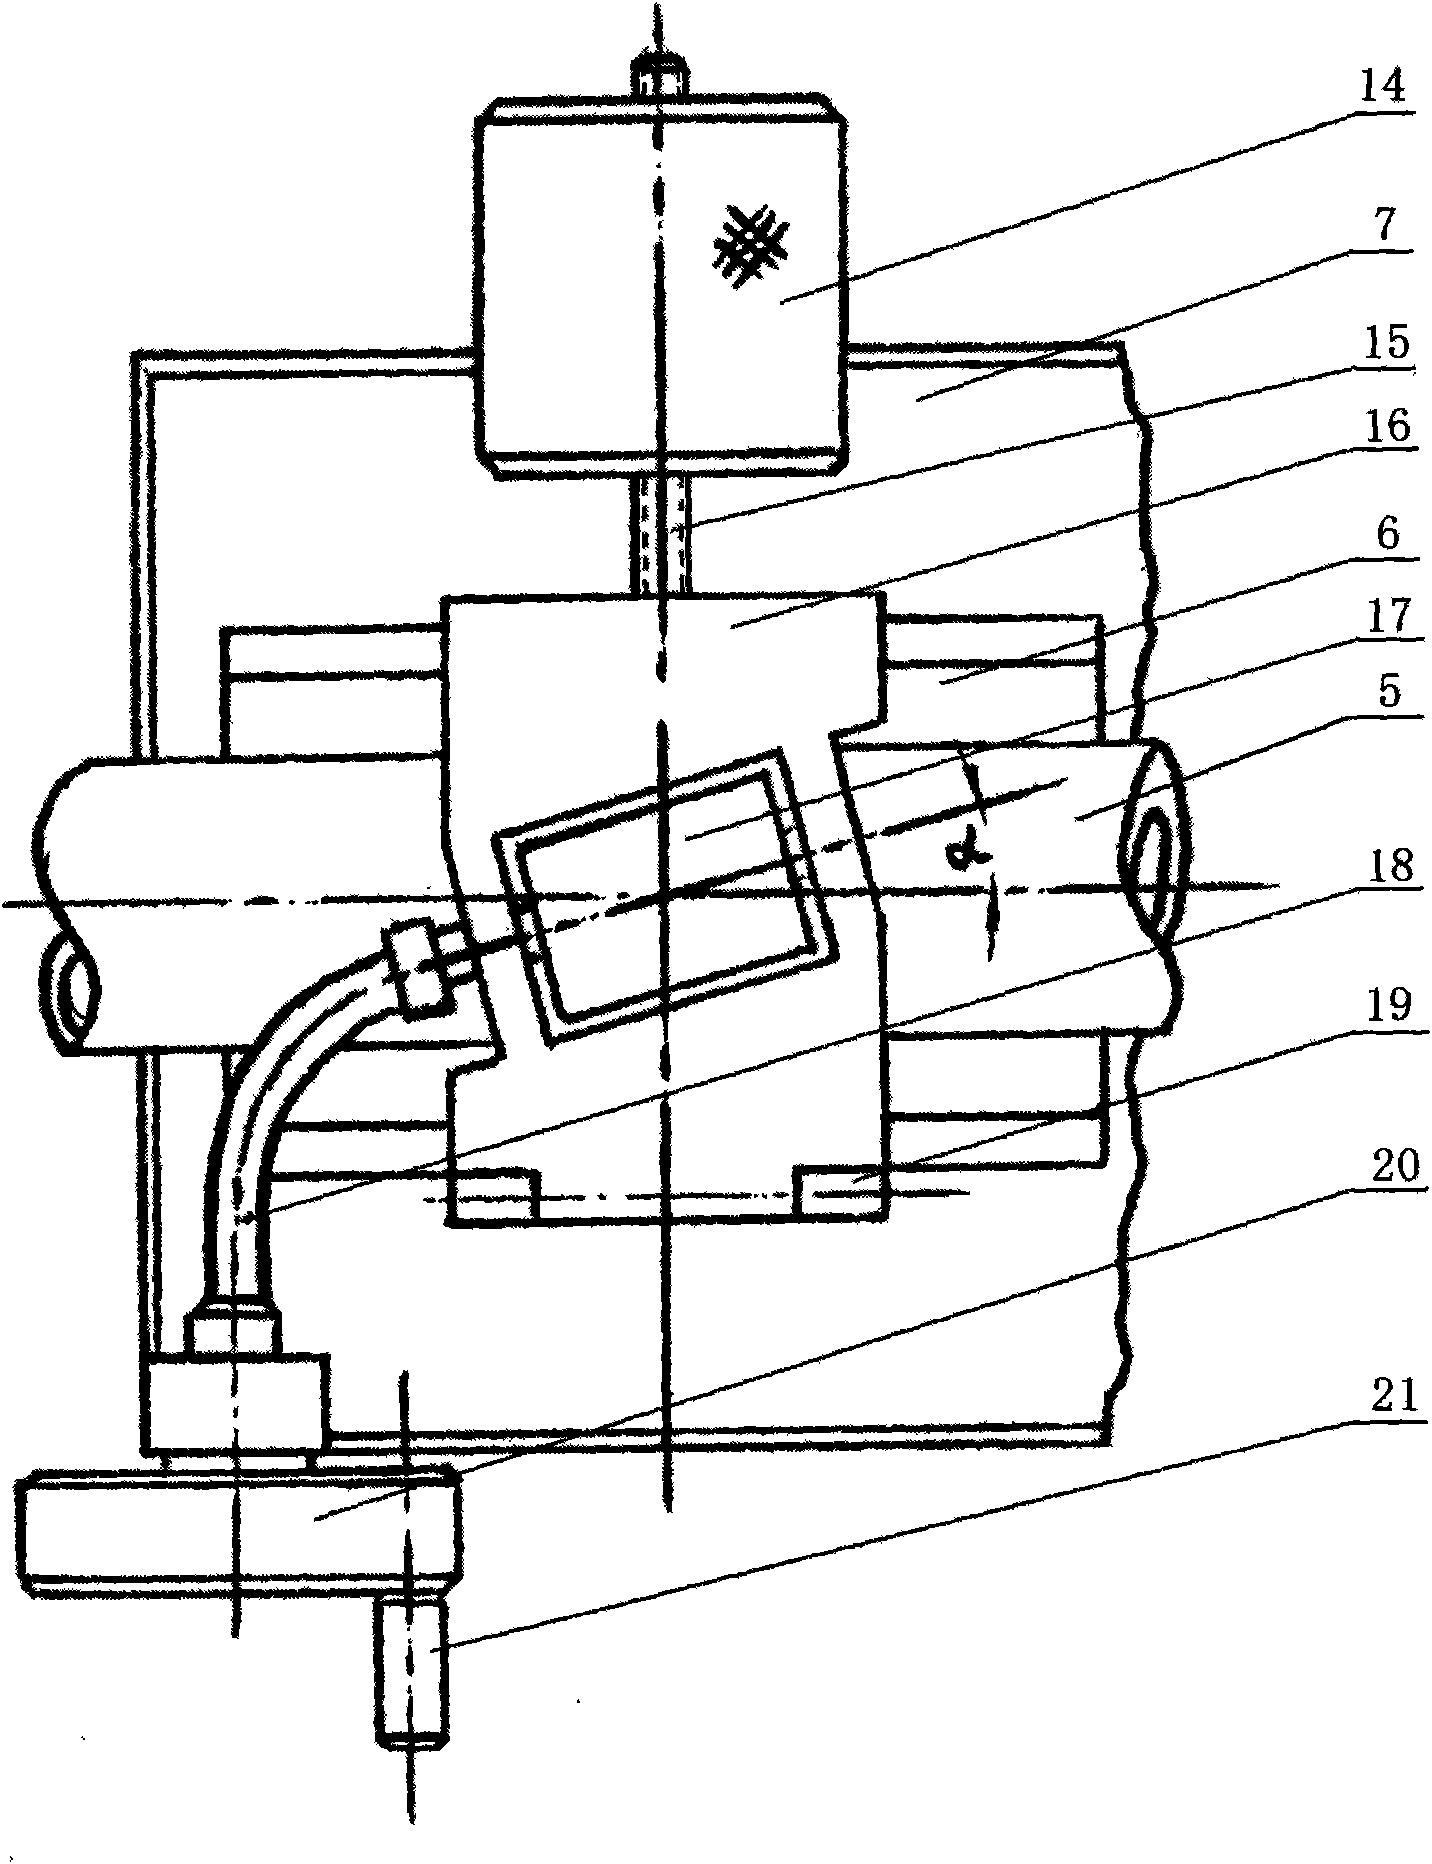 Device for measuring wall thickness of pipe